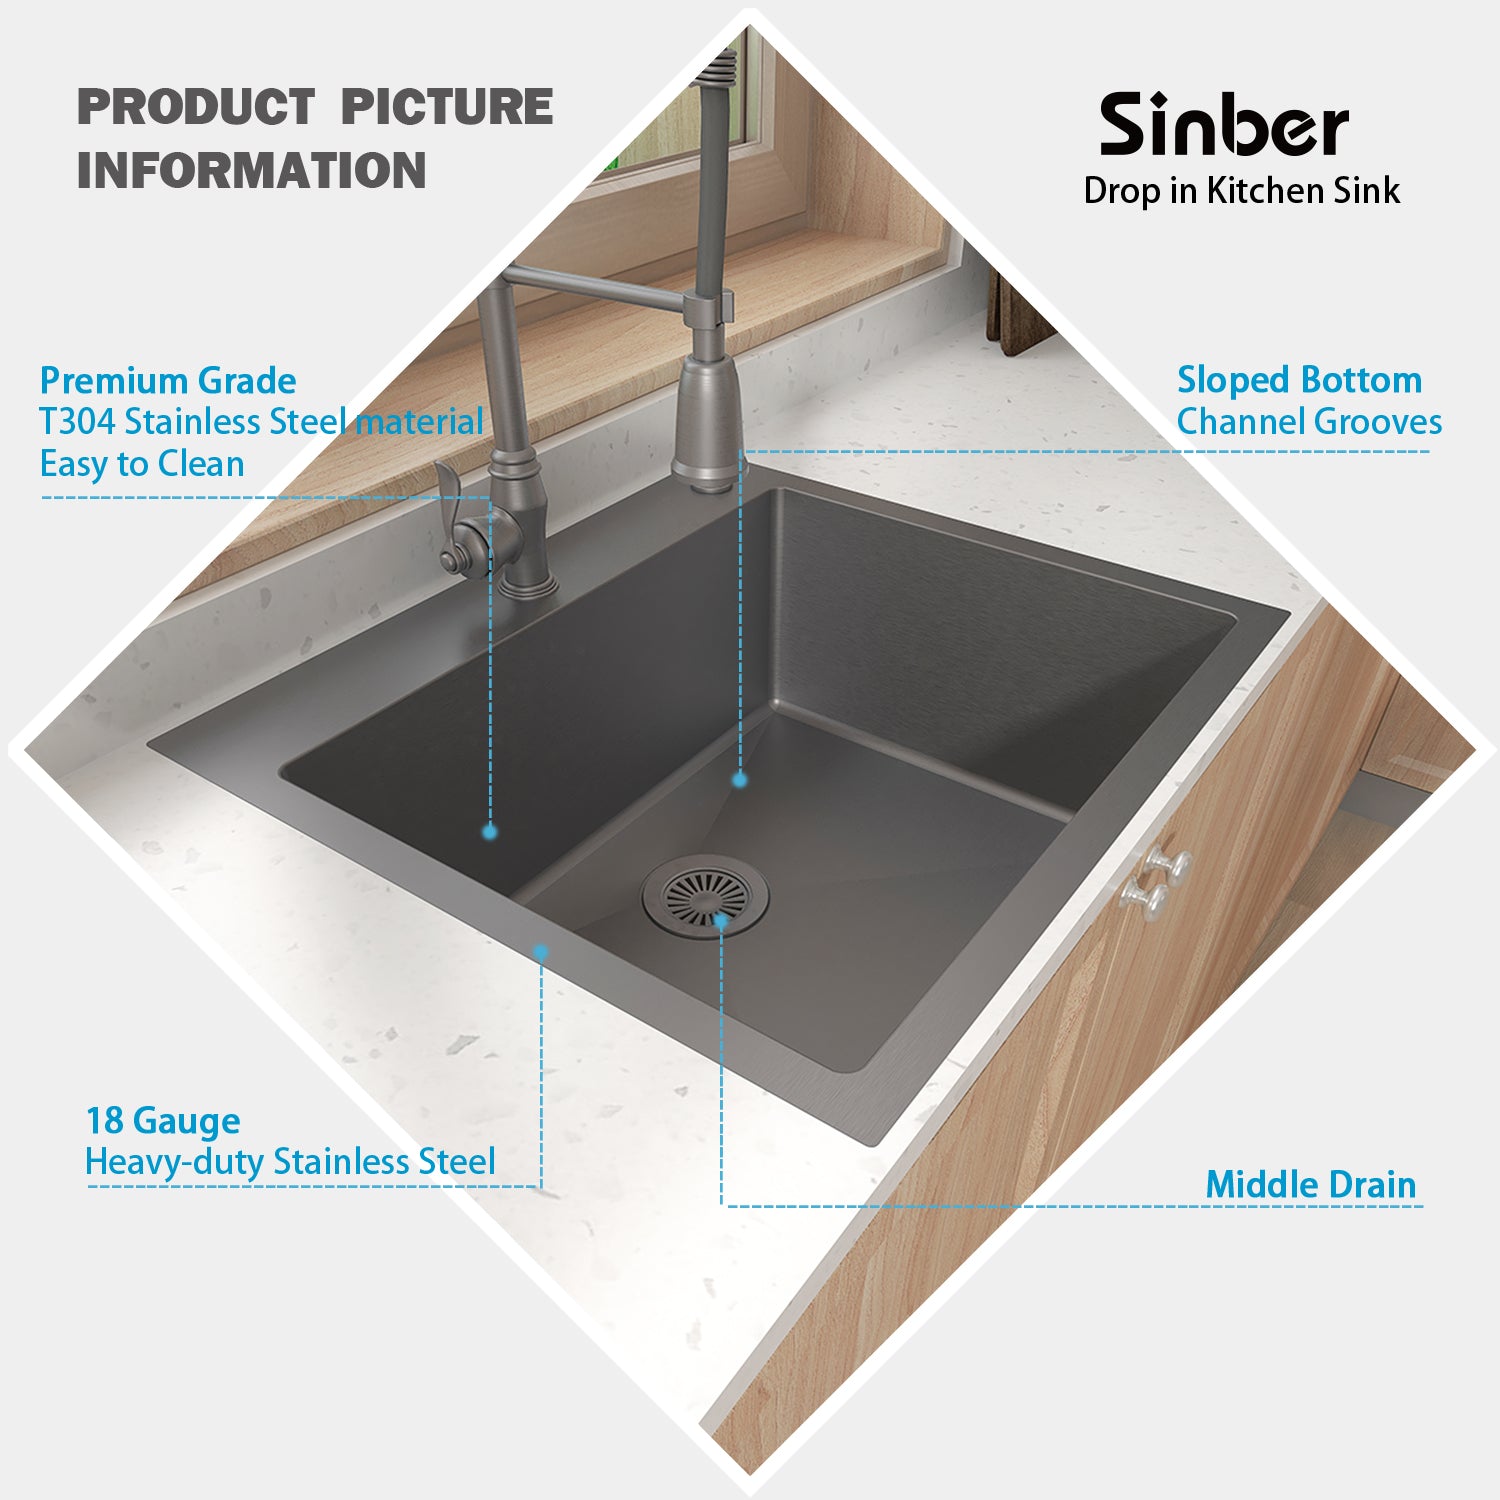 Sinber 25" x 22" x 9" Drop In Single Bowl Kitchen Sink with 18 Gauge 304 Stainless Steel Black Finish HT2522S-B (Sink Only)